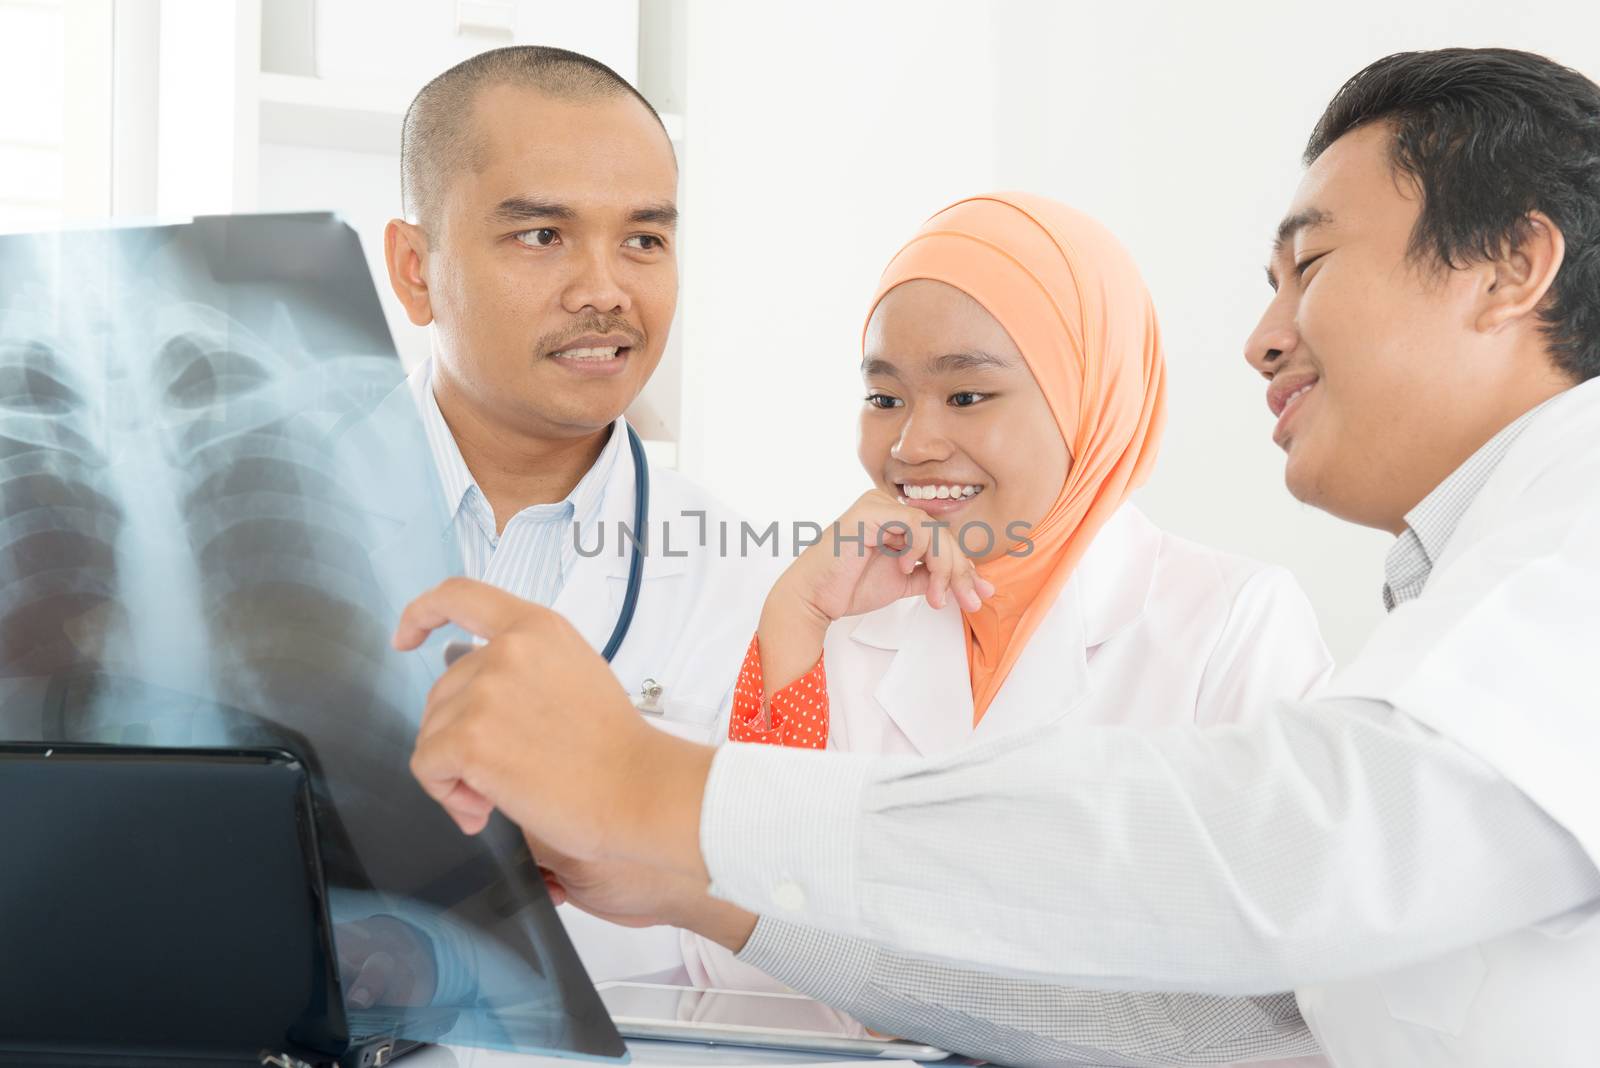 Surgeon and doctor analyzing x-ray together in medical office. Southeast Asian Muslim people.